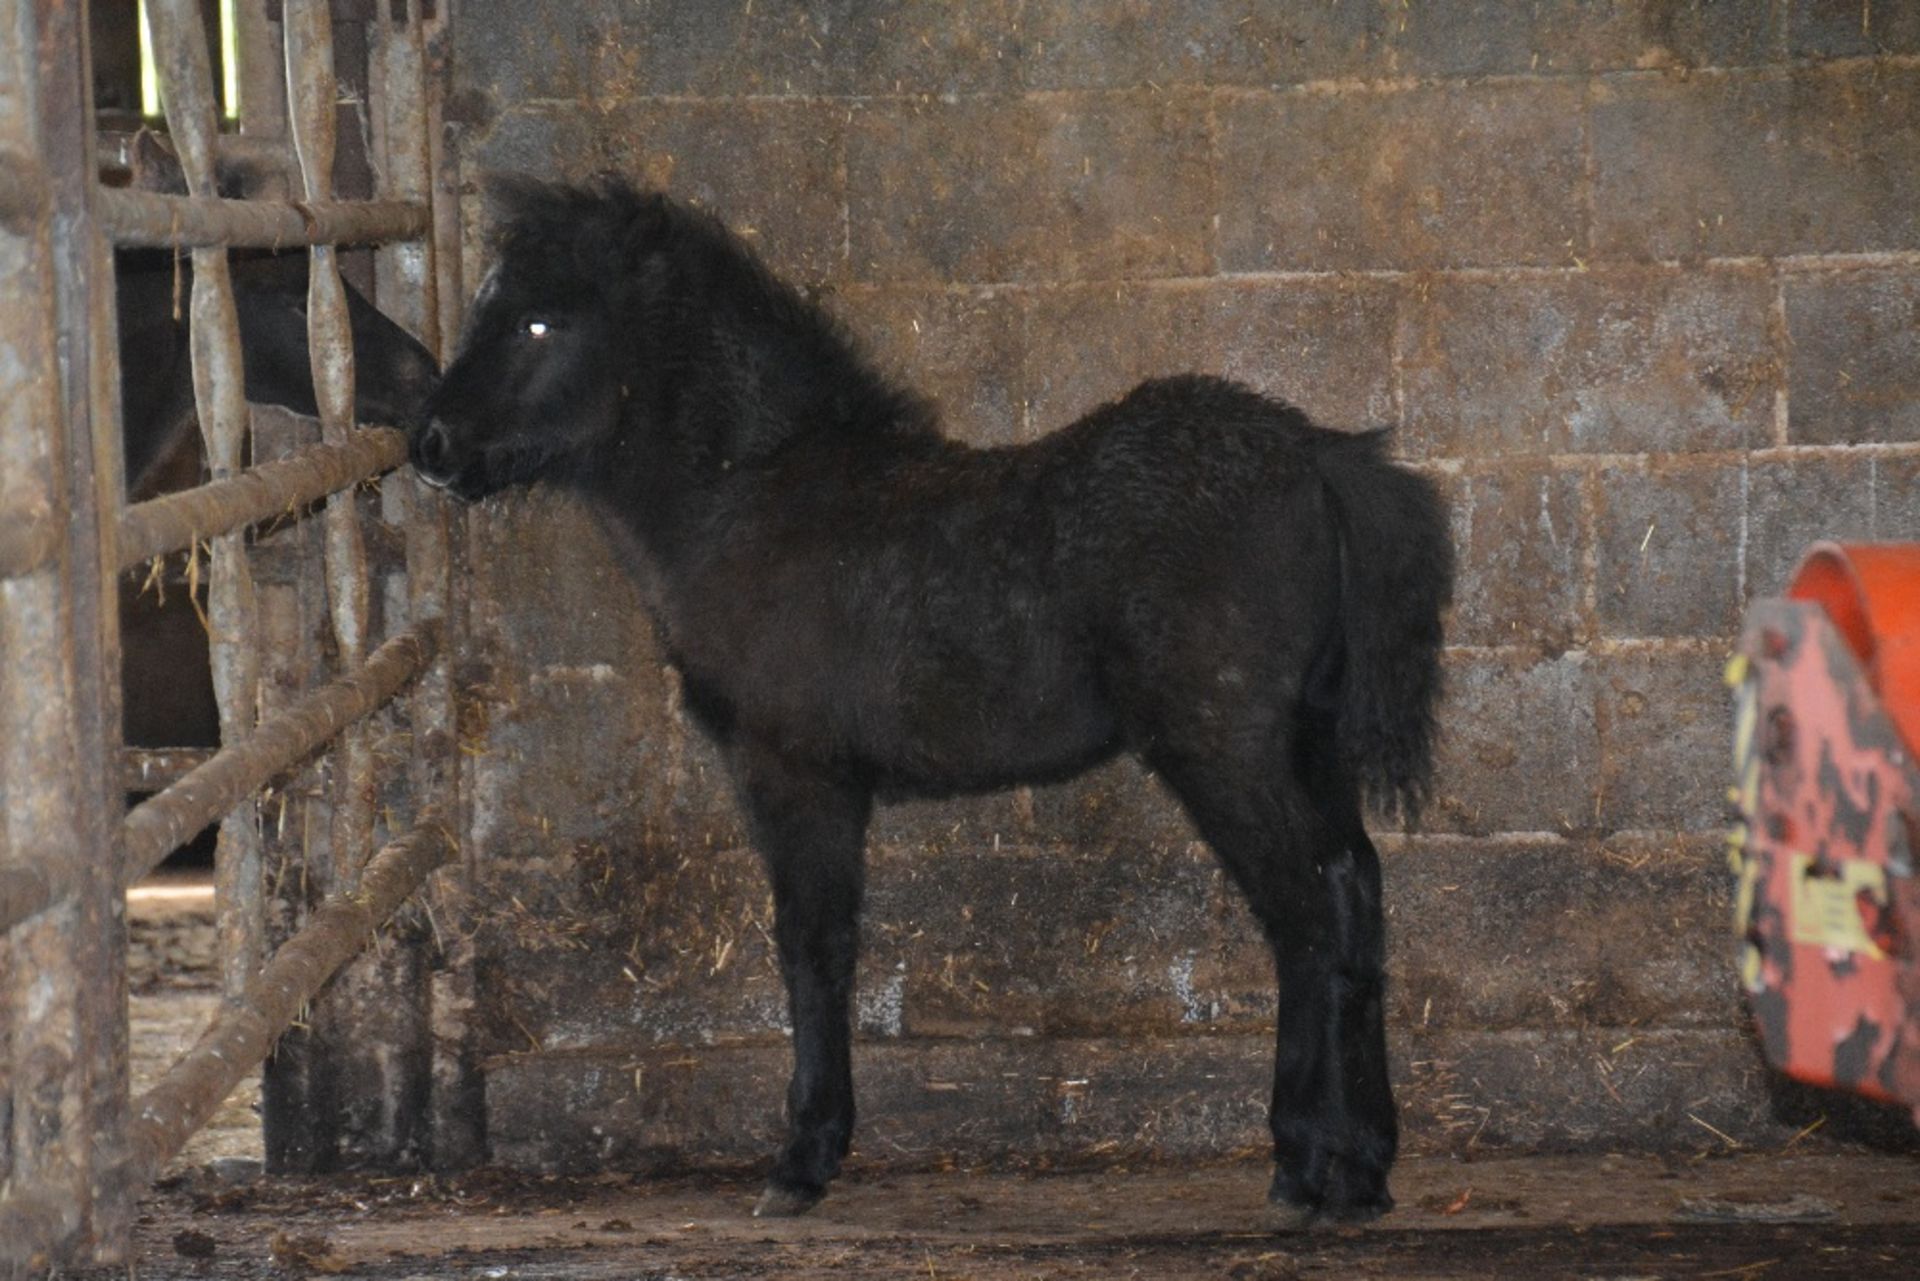 'BLACKATOR KIP' DARTMOOR HILL PONY GREY COLT APPROX 6 MONTHS OLD - Image 3 of 4